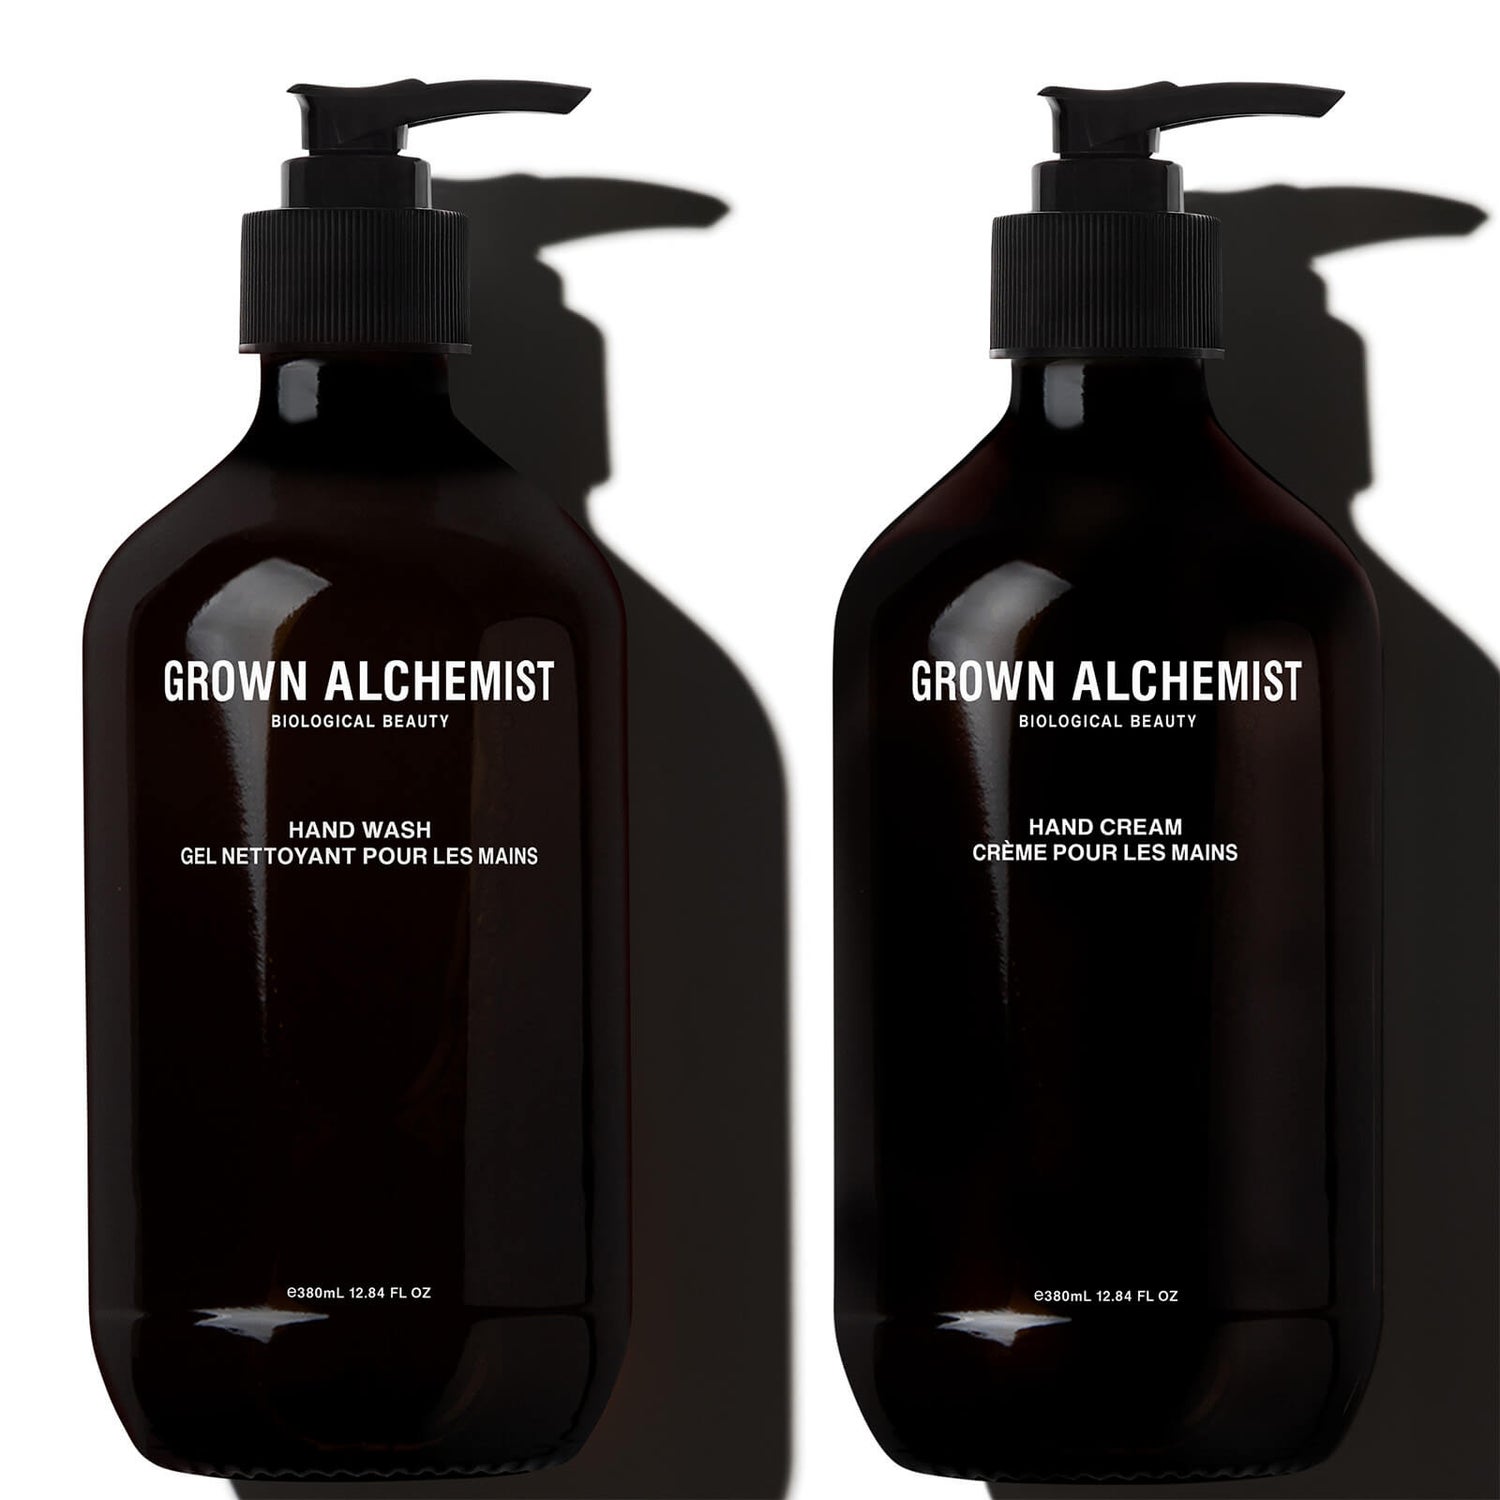 Grown Alchemist Limited Edition Amber Glass Bottle Hand Care Kit (Worth £82.00)